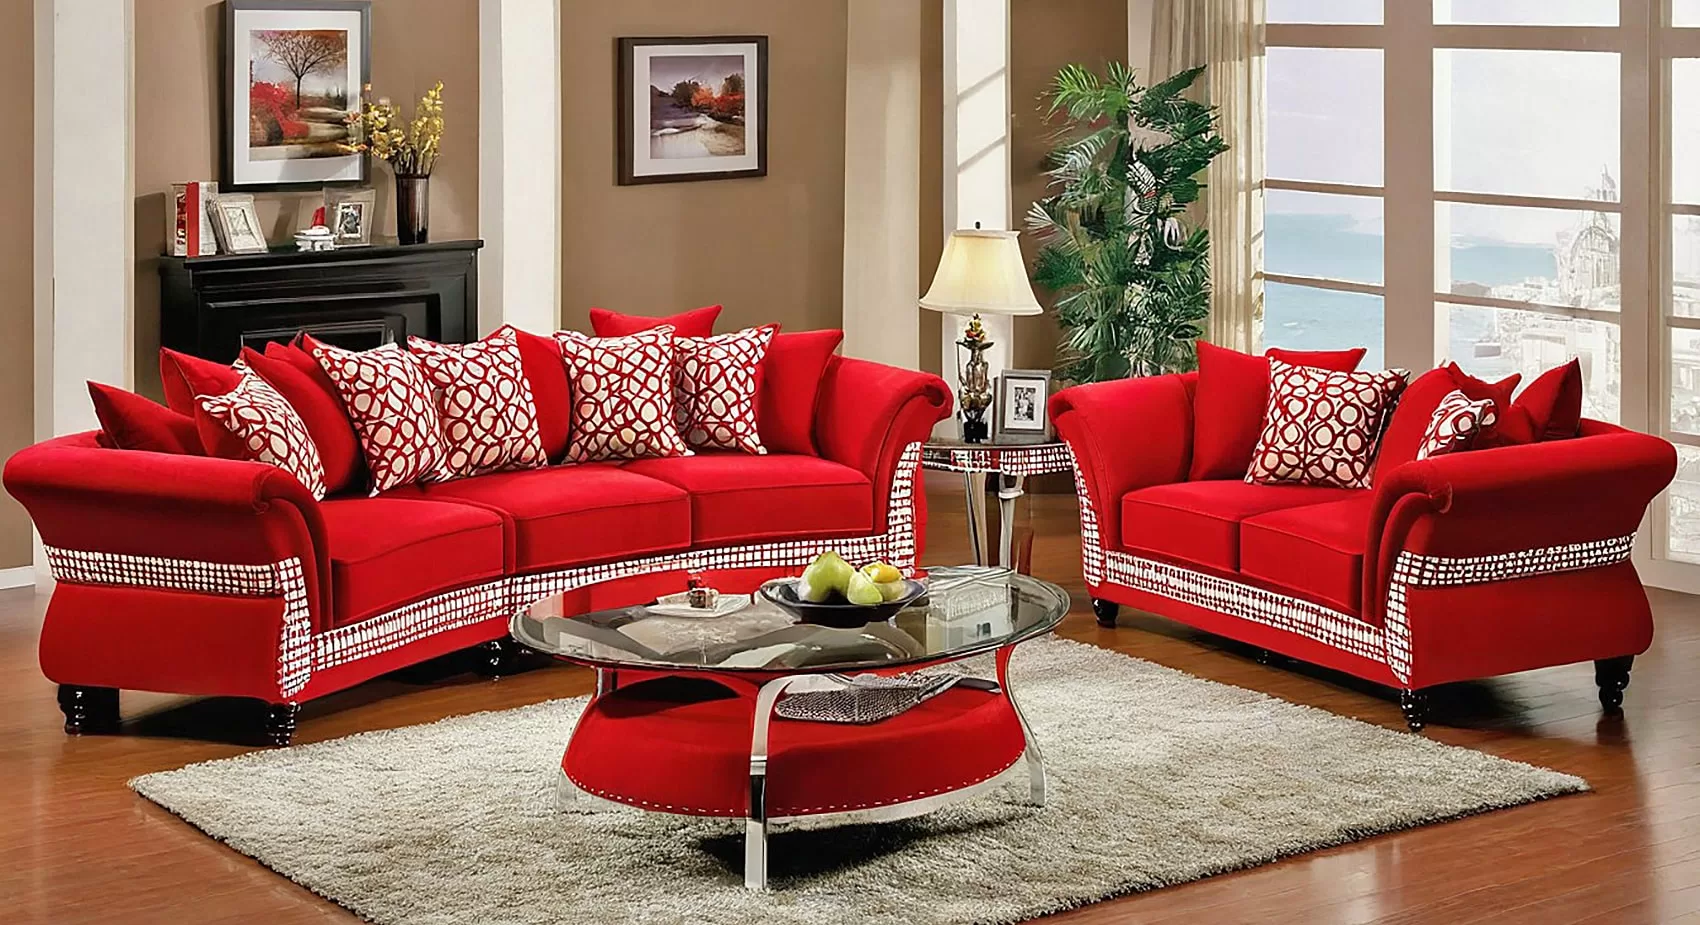 Red Sofa | Red Couch